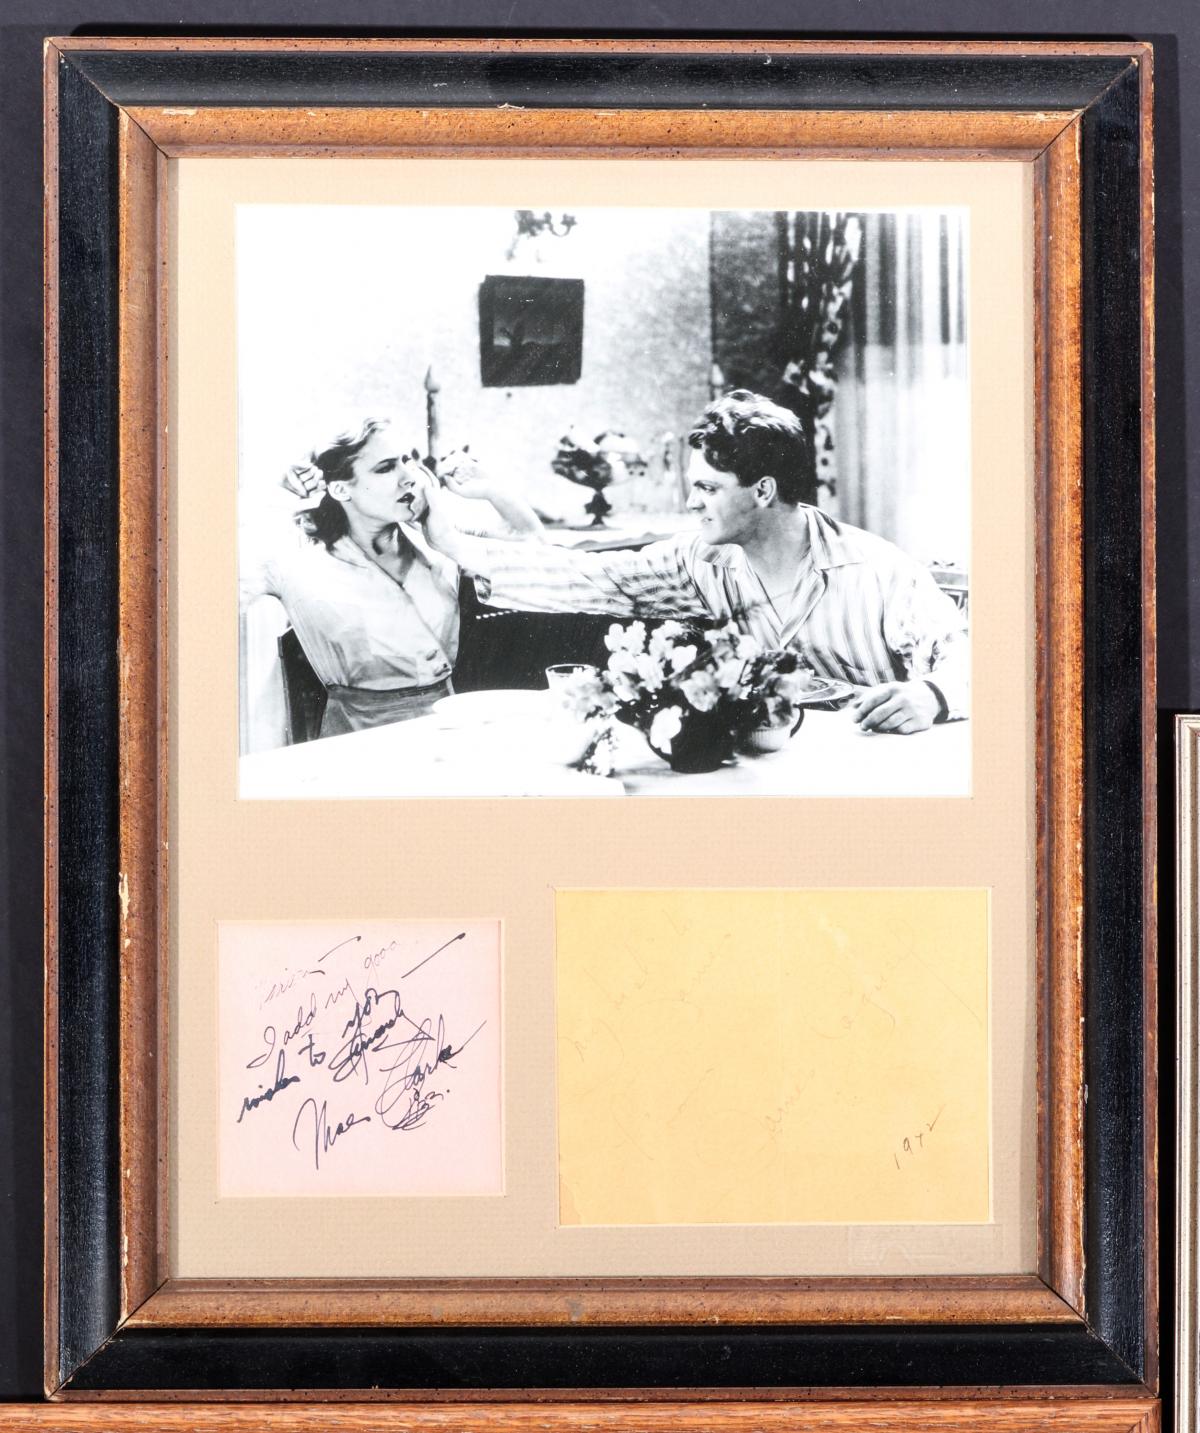 JAMES CAGNEY AND MAE CLARK AUTOGRAPHS AND PHOTO